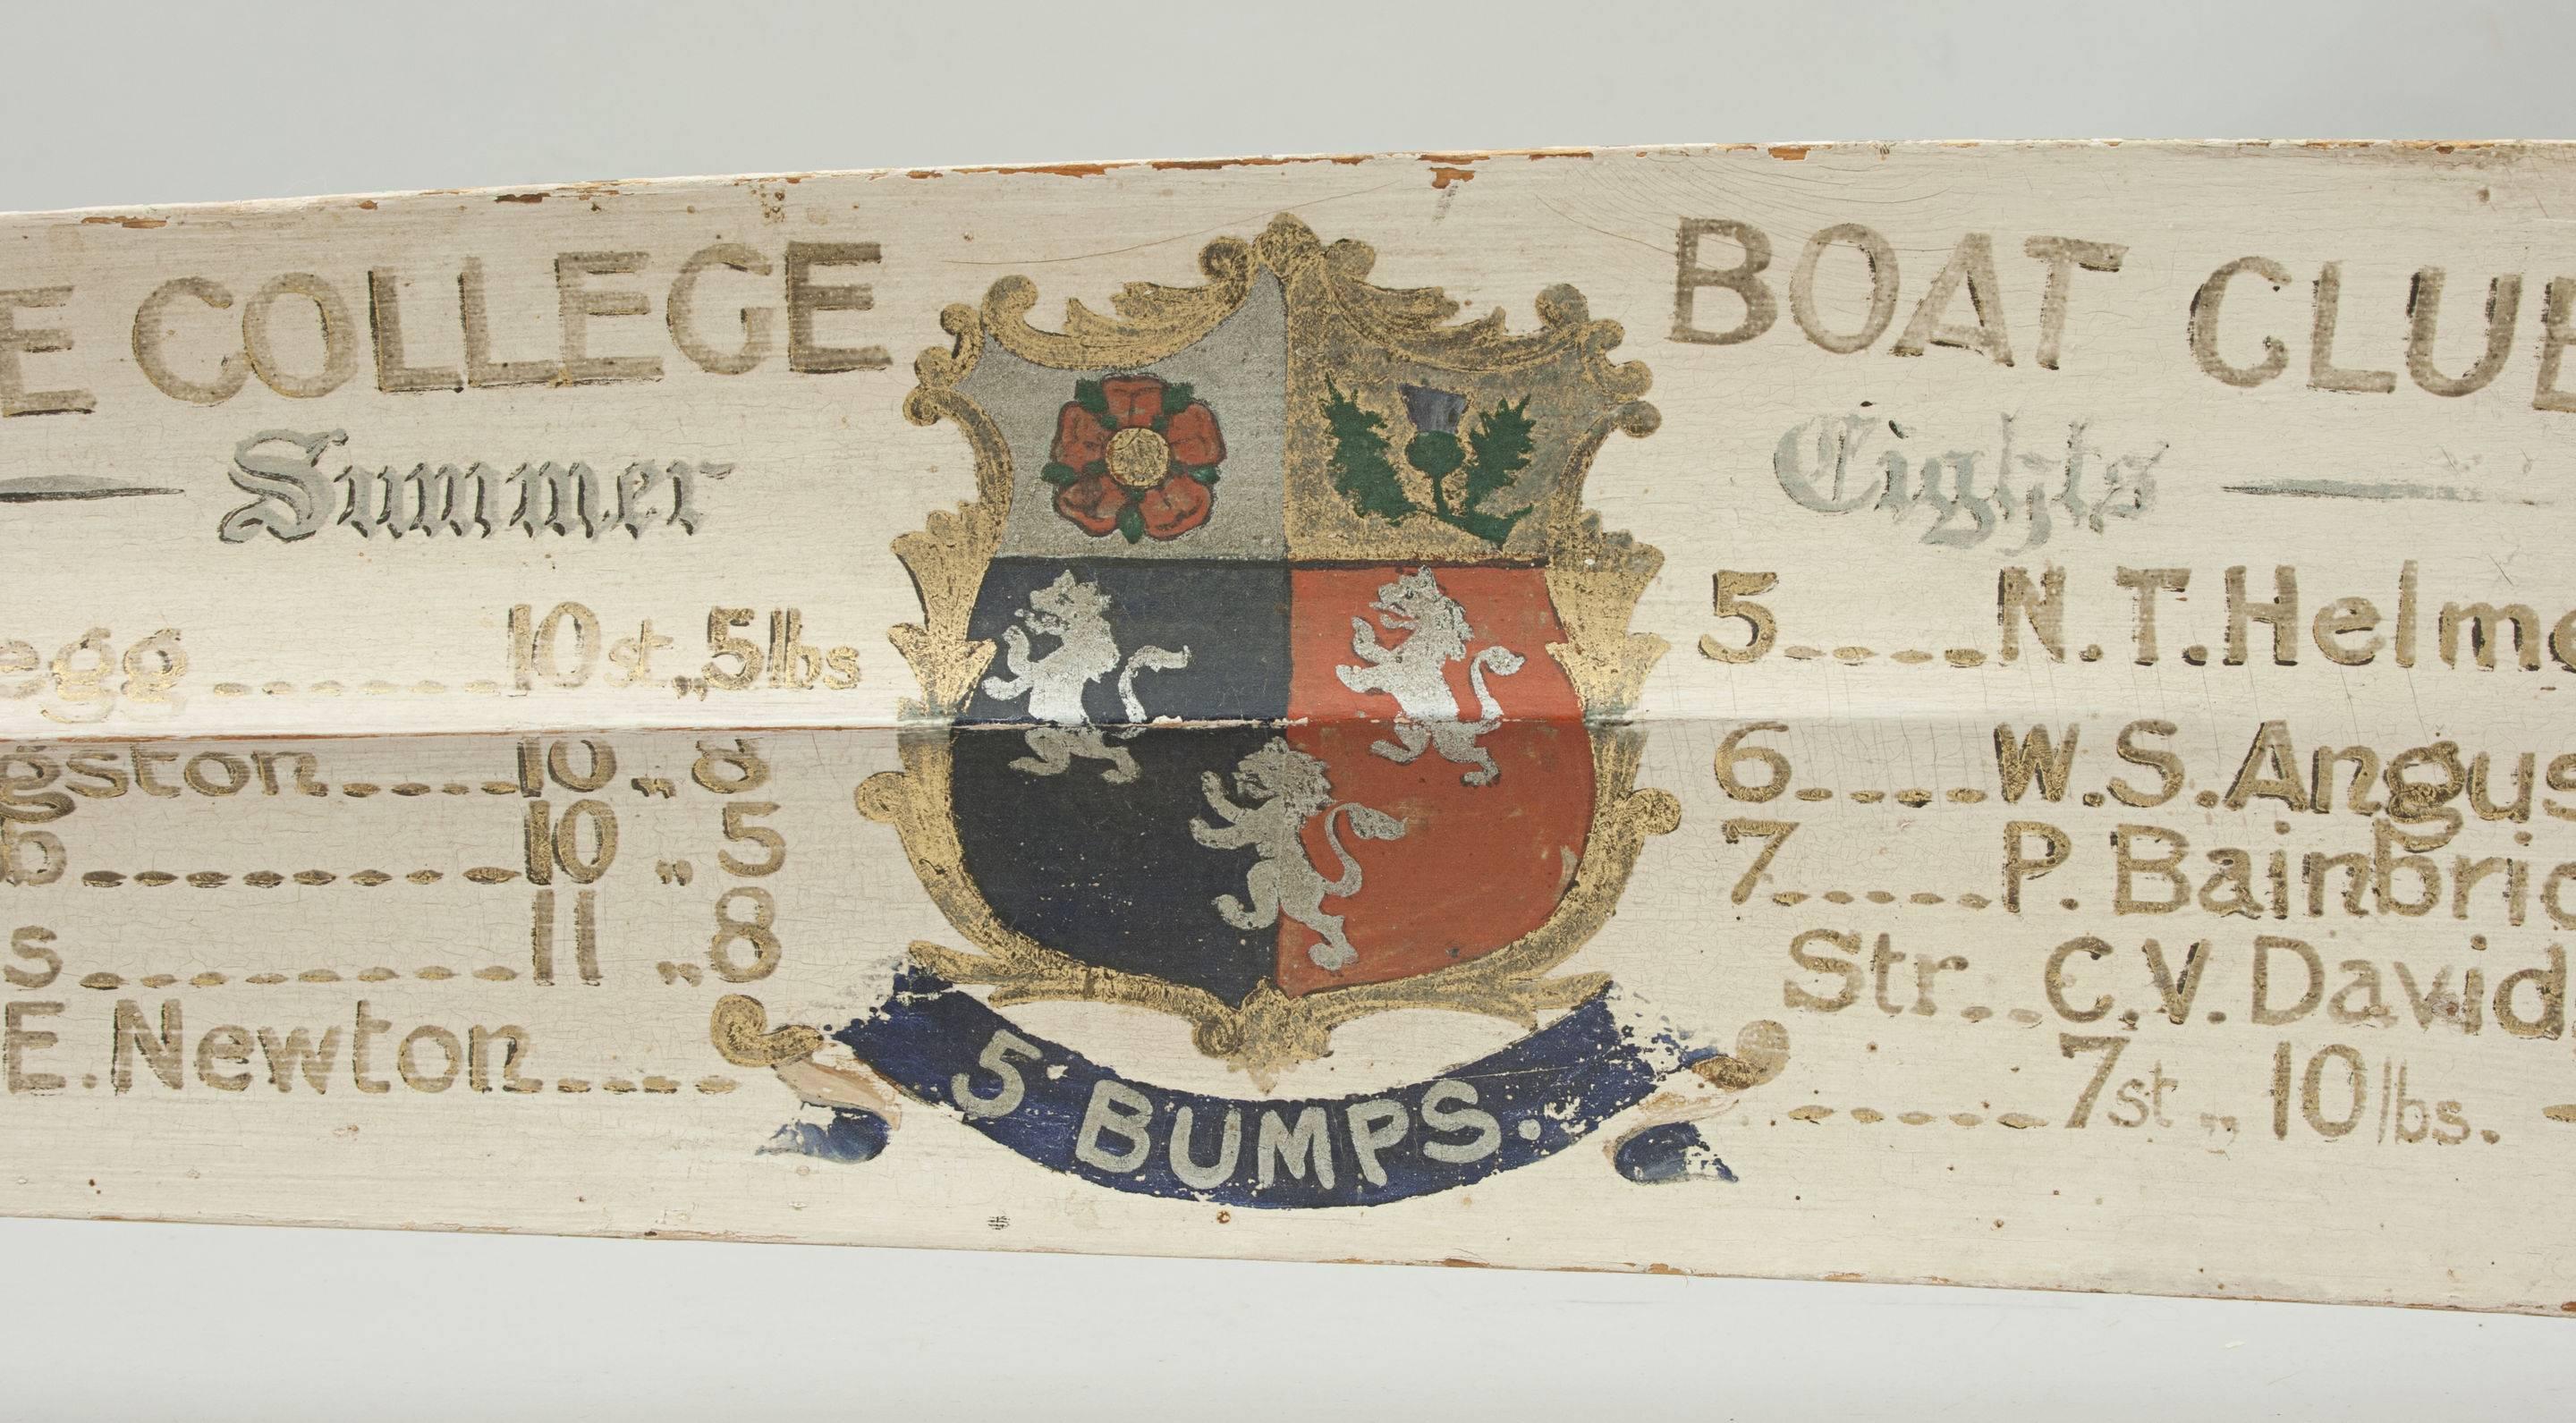 Pembroke College, Oxford, Presentation Oar, Trophy Blade, 1922. 
The oar is an original traditional Pembroke College presentation full length rowing oar with gilt calligraphy and college insignia. The writing on the trophy blade is in good